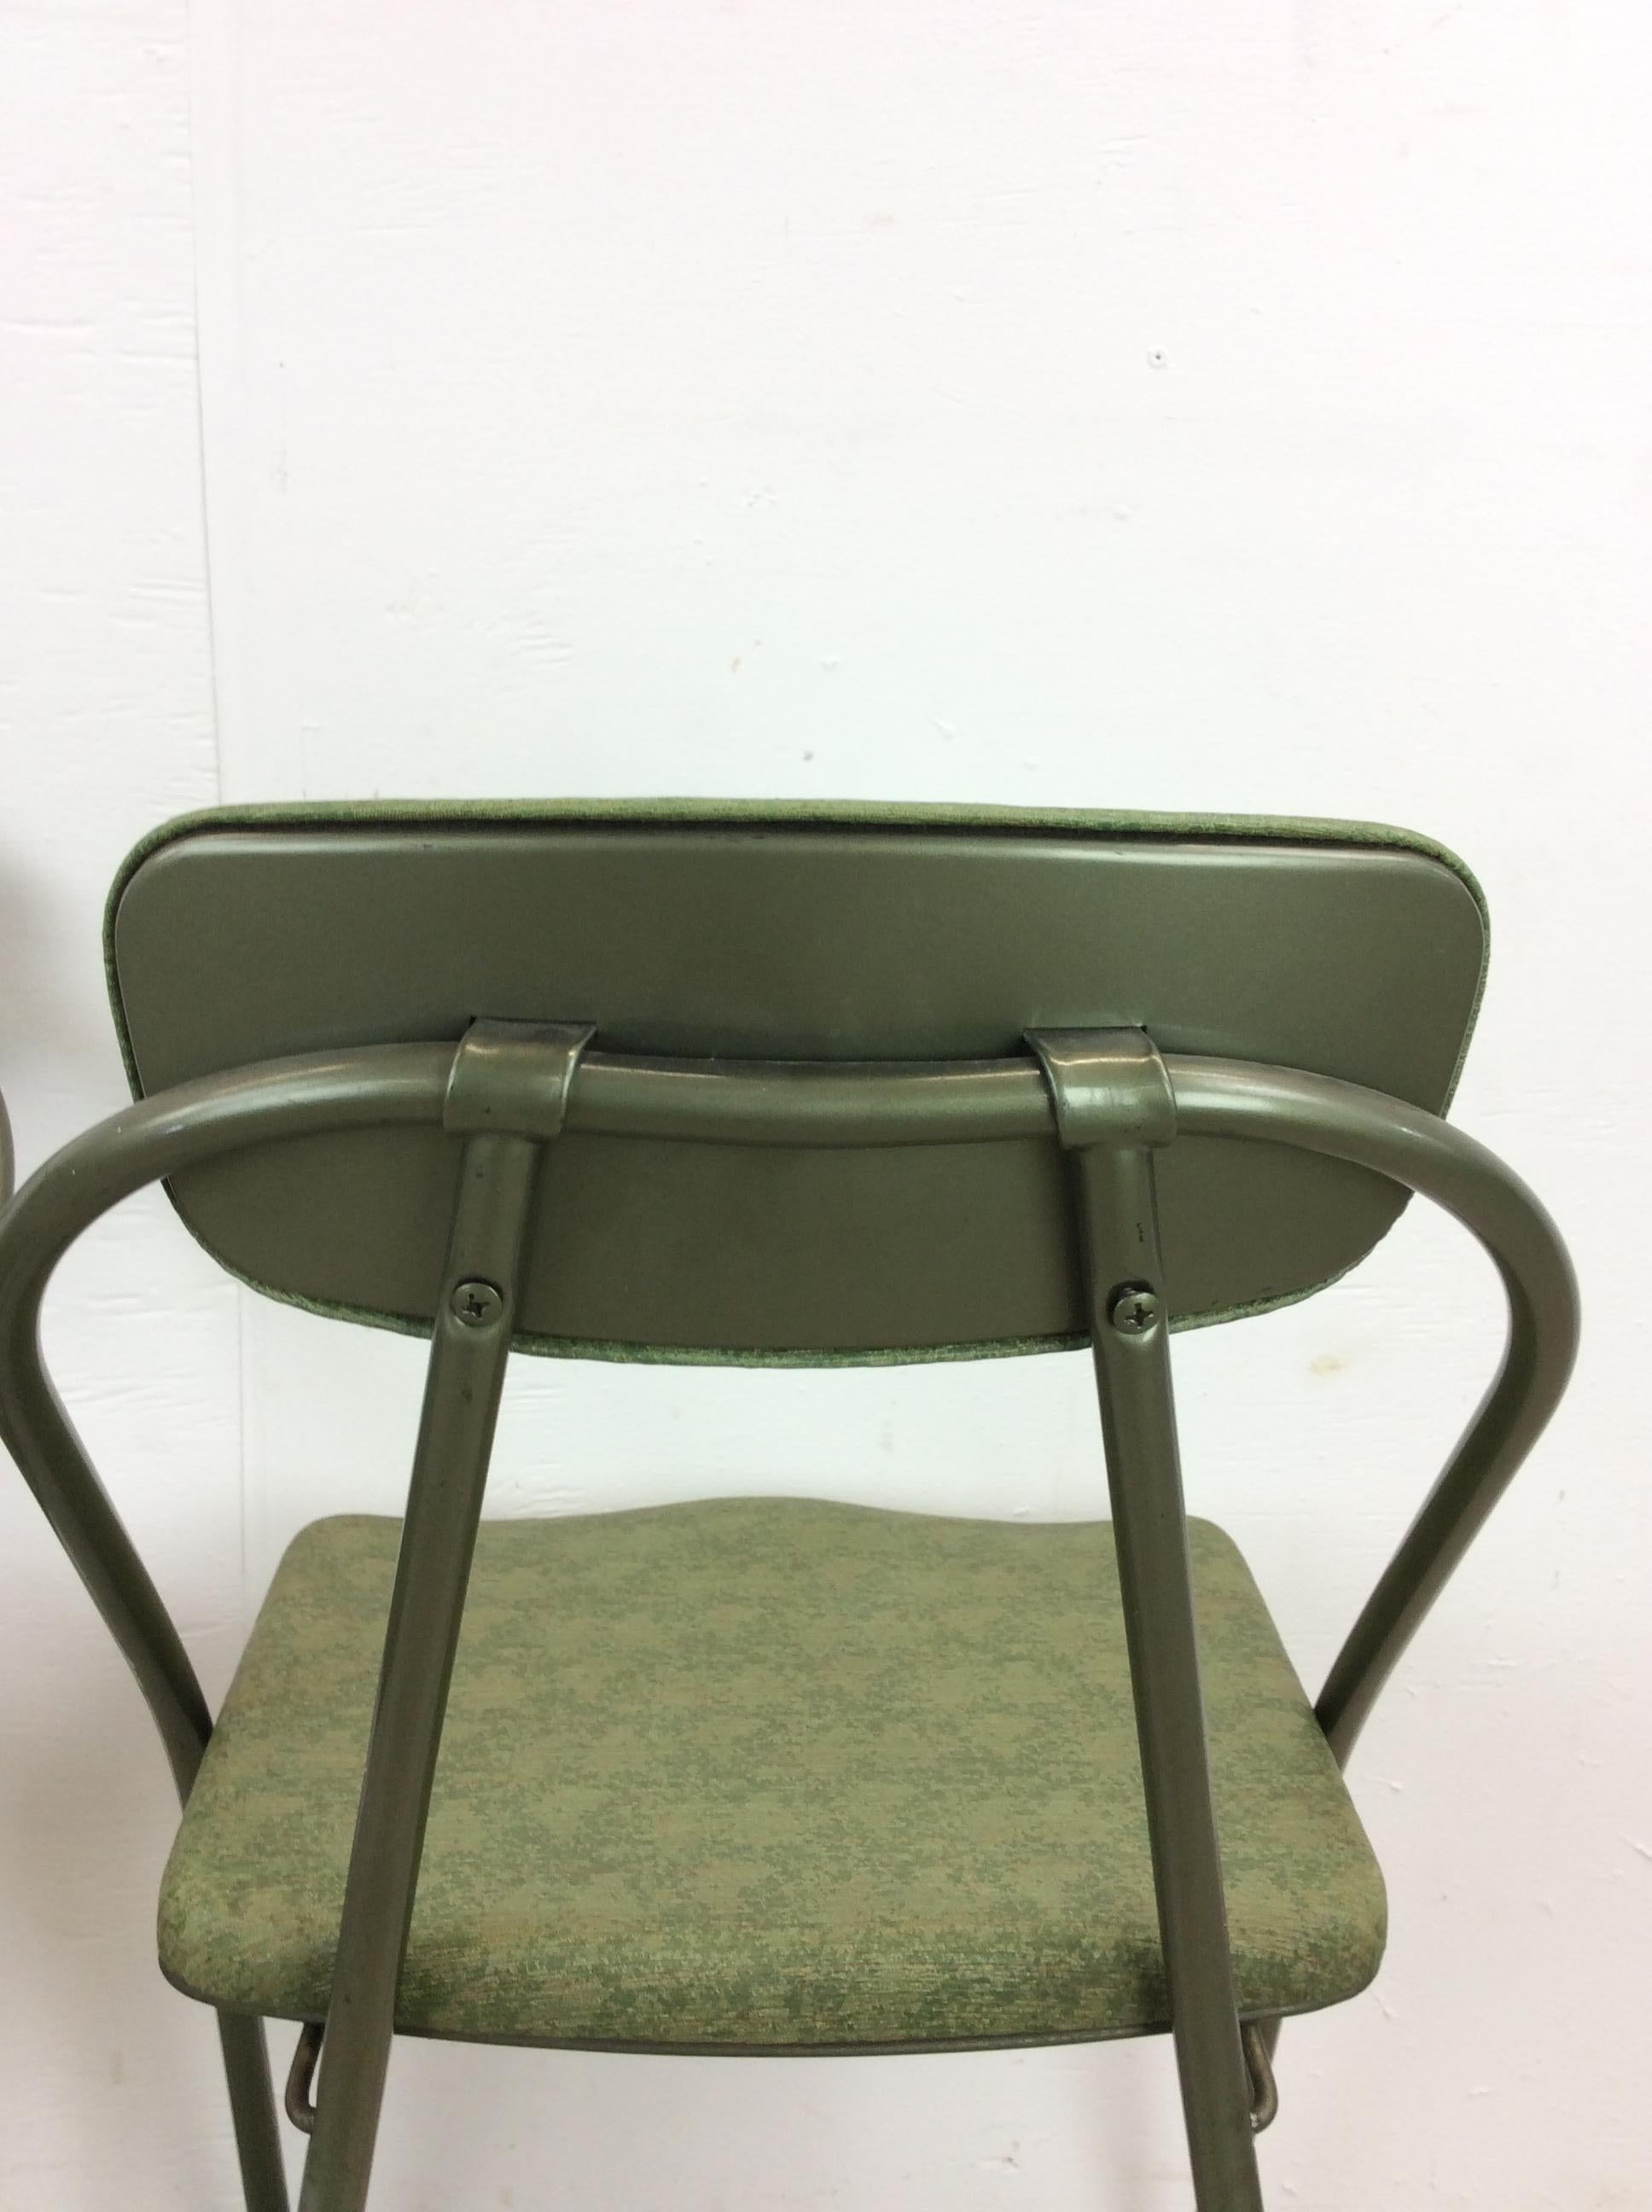 Upholstery Mid Century Modern Folding Chairs with Green Vinyl by Cosco For Sale